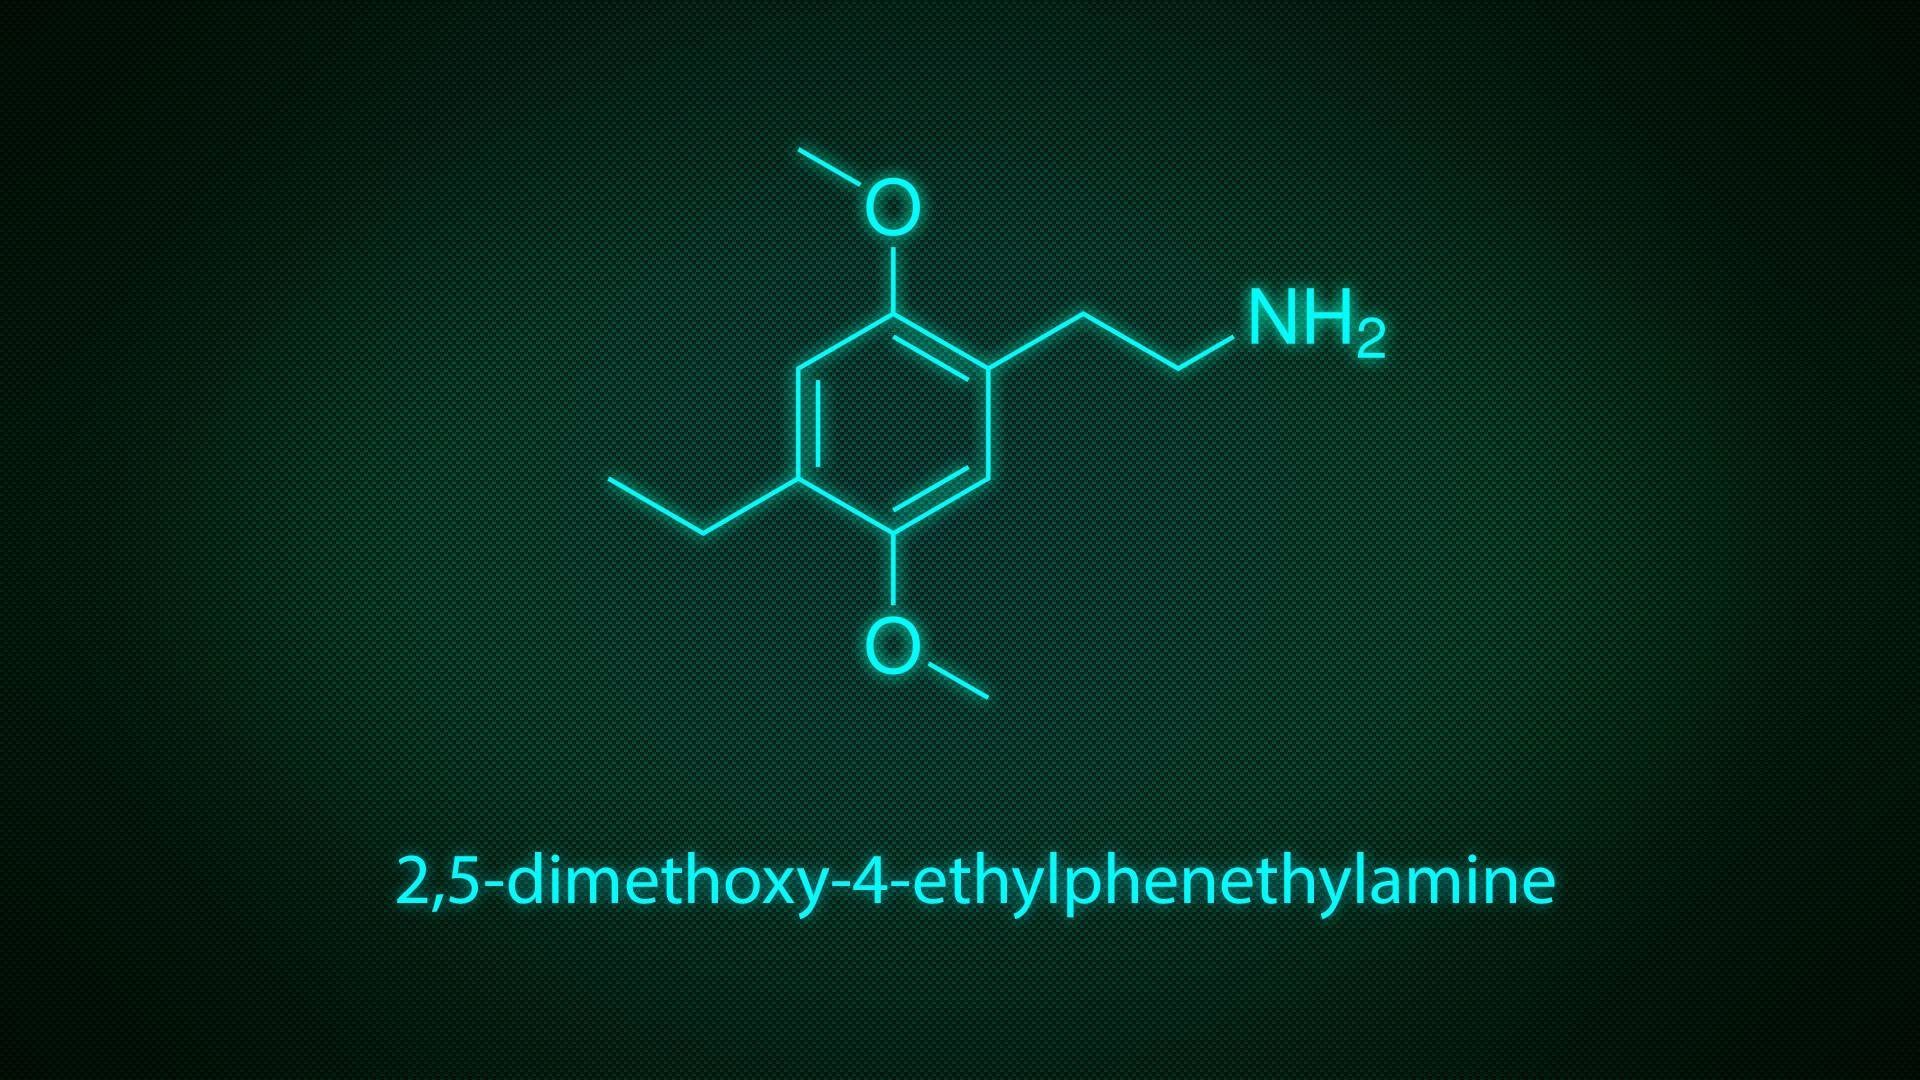 I made a few drug molecule wallpaper (1920x1080) not too long ago, I might as well share them!